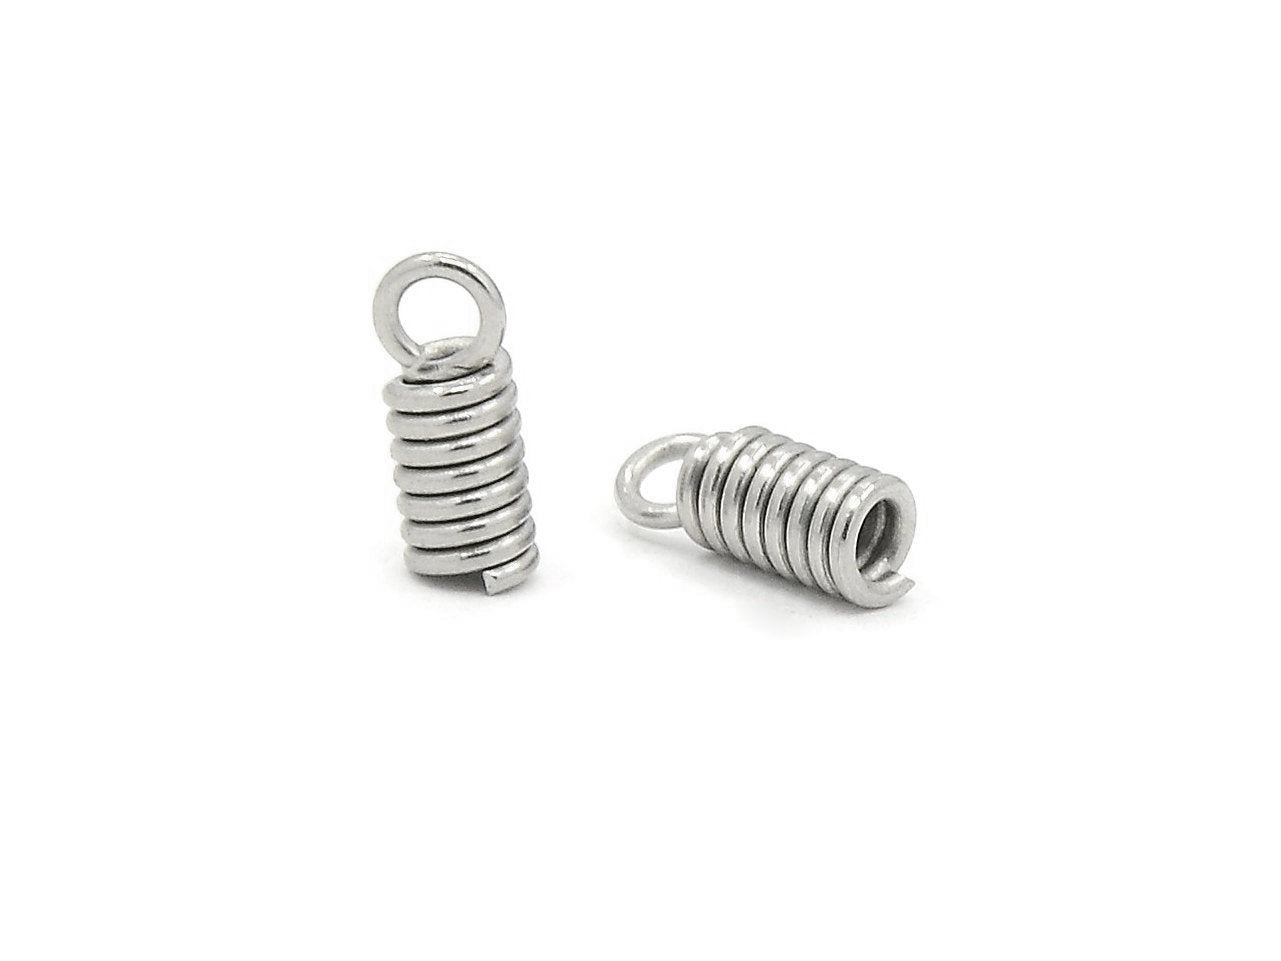 Silver Cord Ends - Stainless steel spring coil ends - hypoallergenic necklace fasteners 20pcs